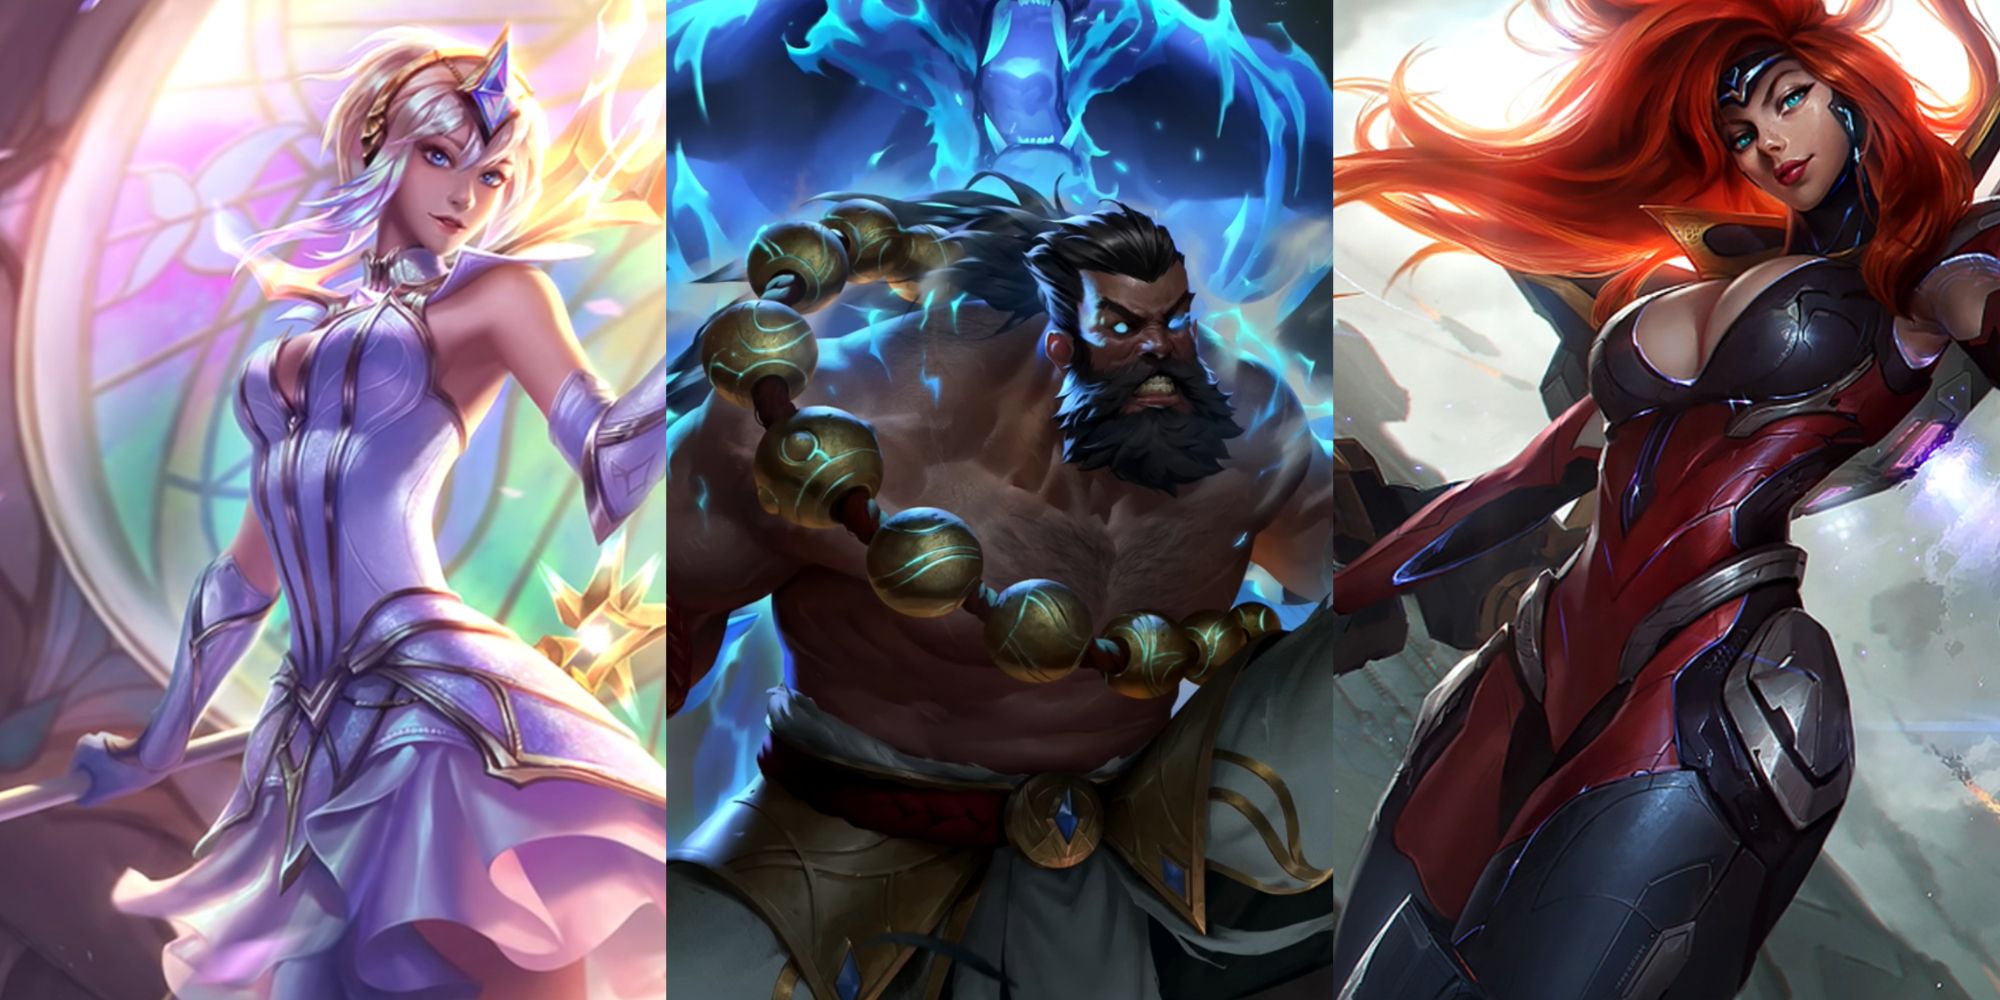 League of Legends collage featuring Lux, Udyr,and Miss Fortune